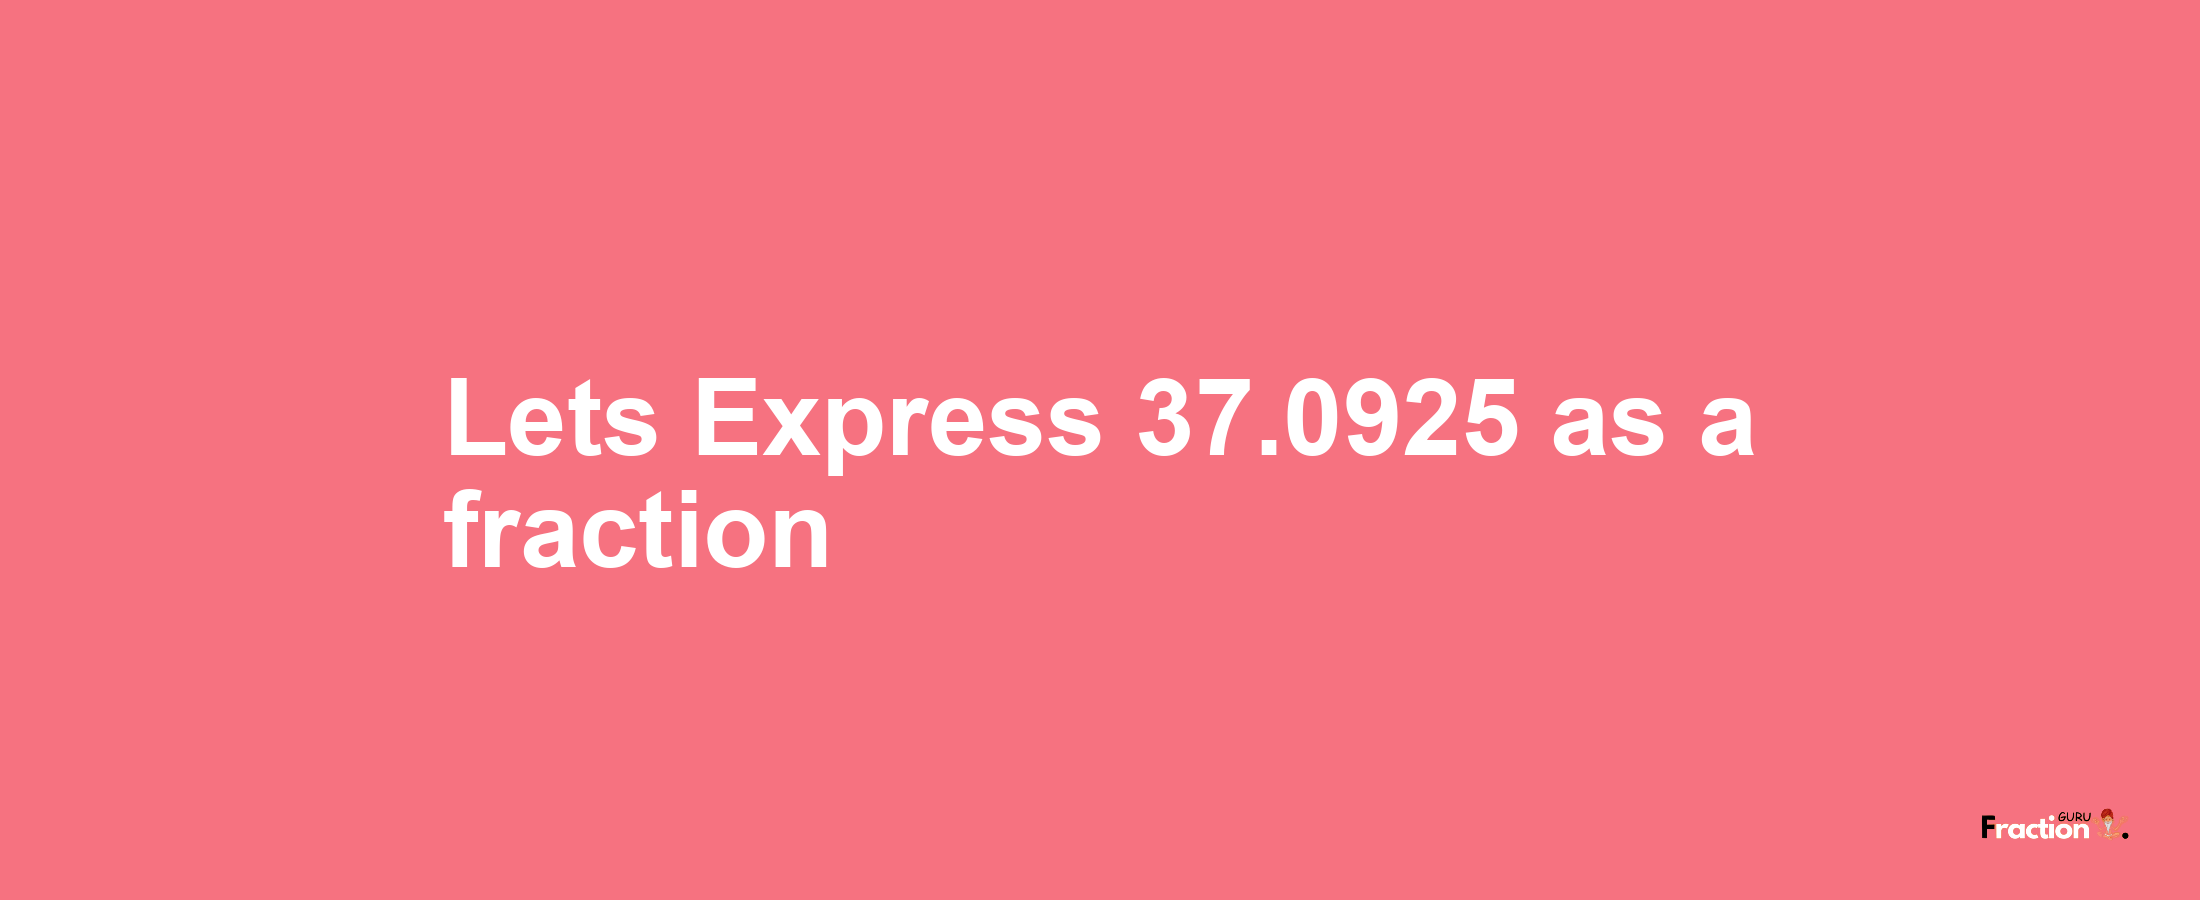 Lets Express 37.0925 as afraction